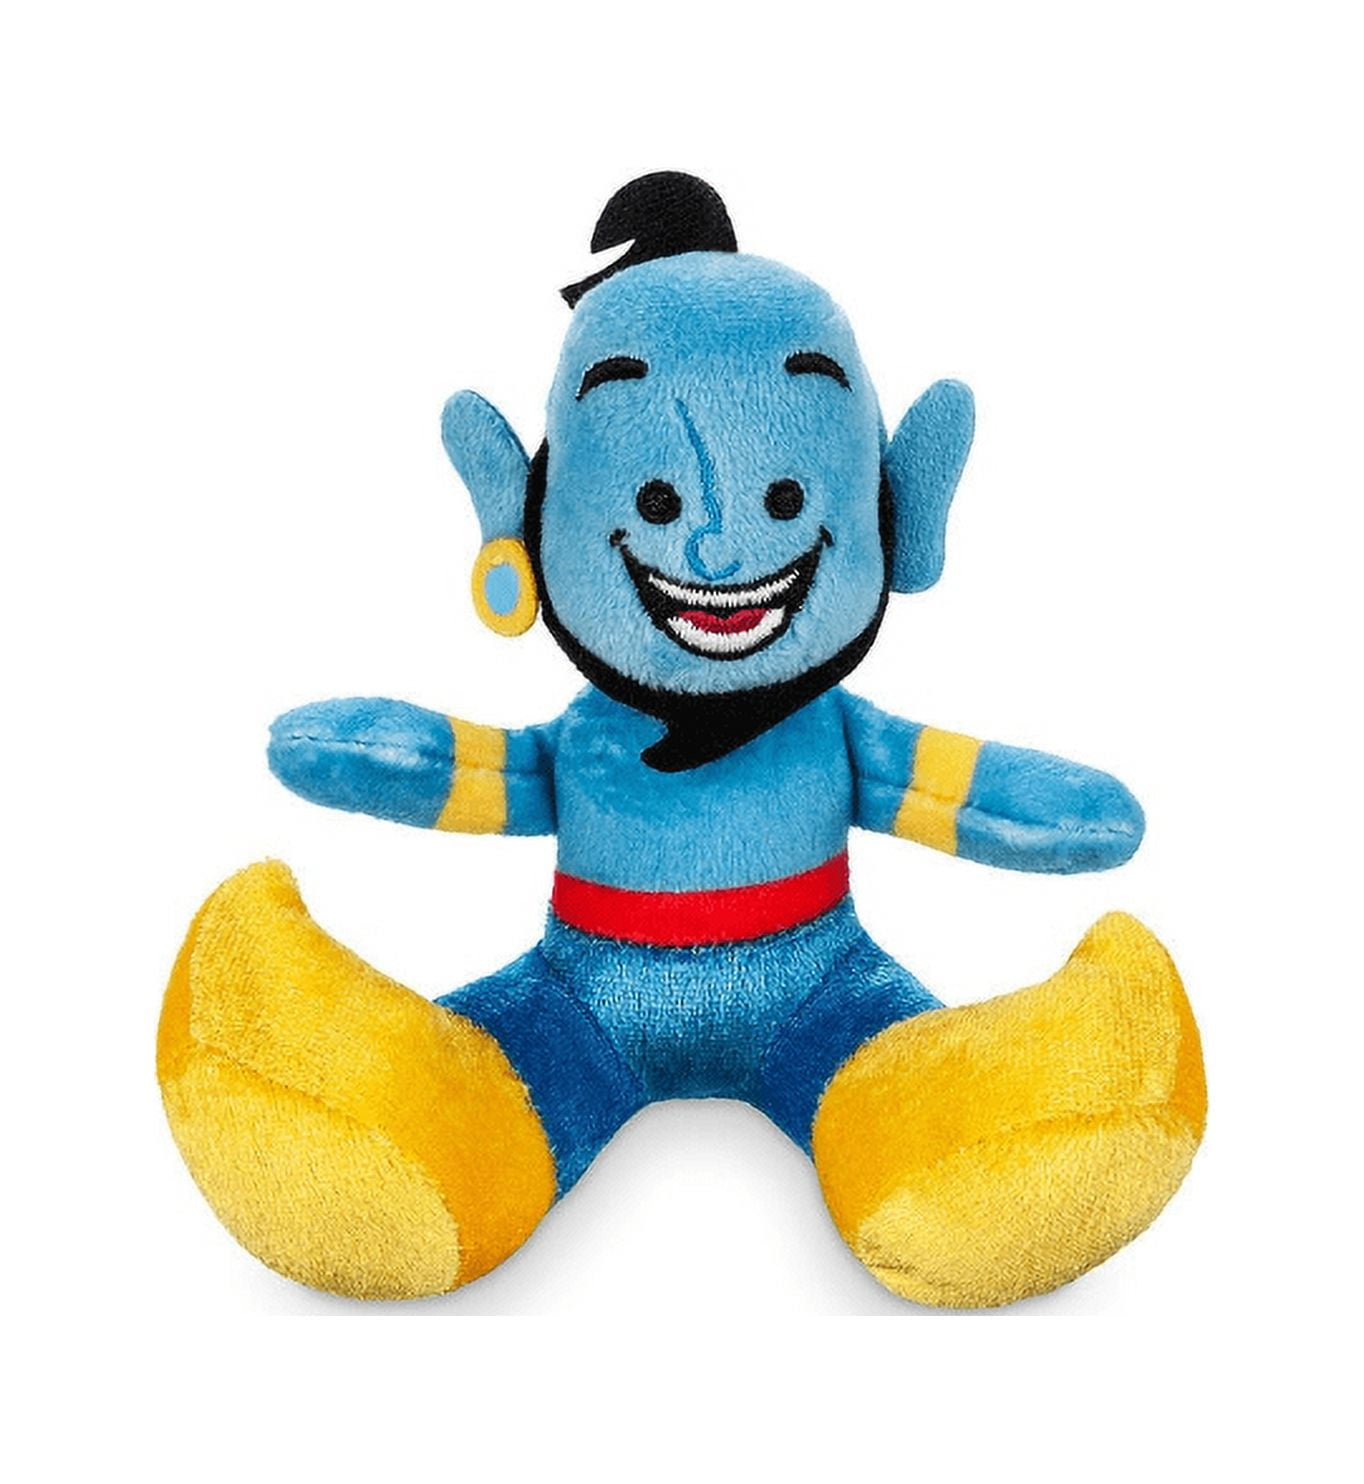 Mighty Mojo Marina Collectible Plush Doll from Zig and Sharko Show -  Stuffed Toy - Cute, Soft, Stuffed Plush for Kids - Officially Licensed - 12